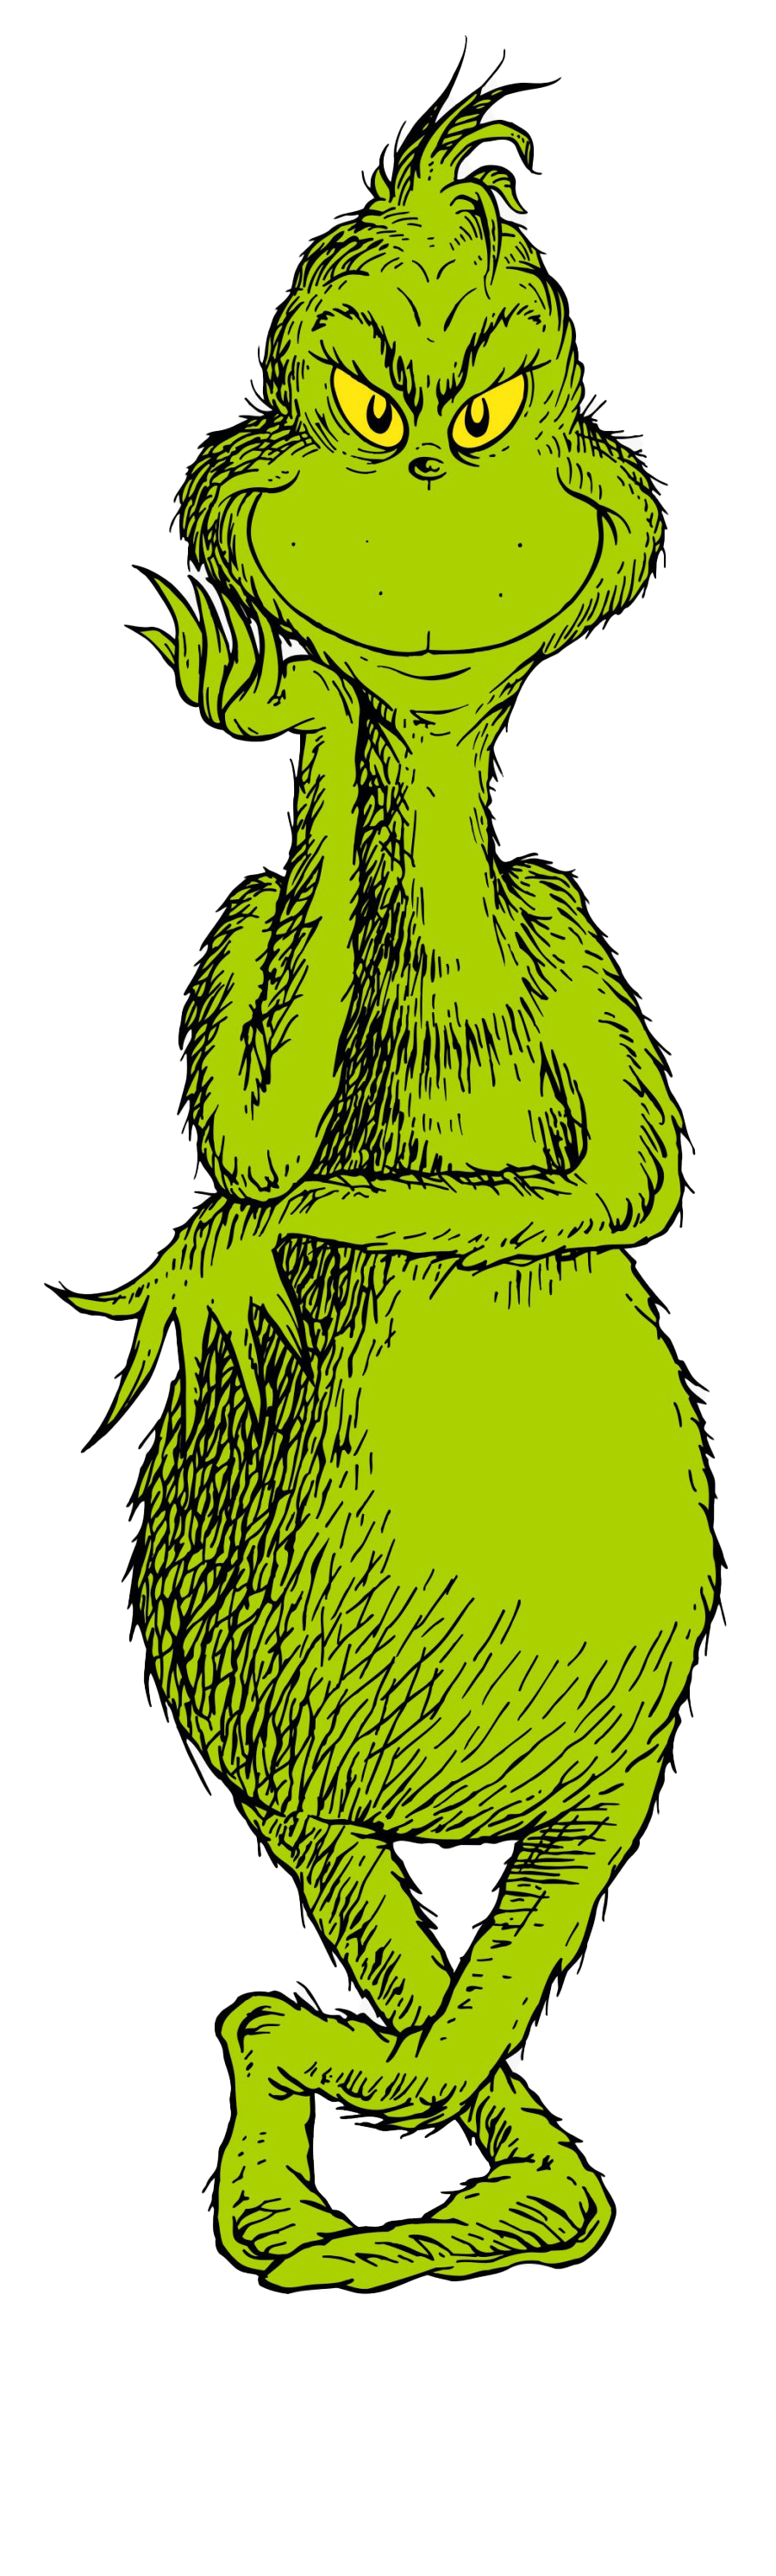 Download PNG image - The Grinch PNG Photos 